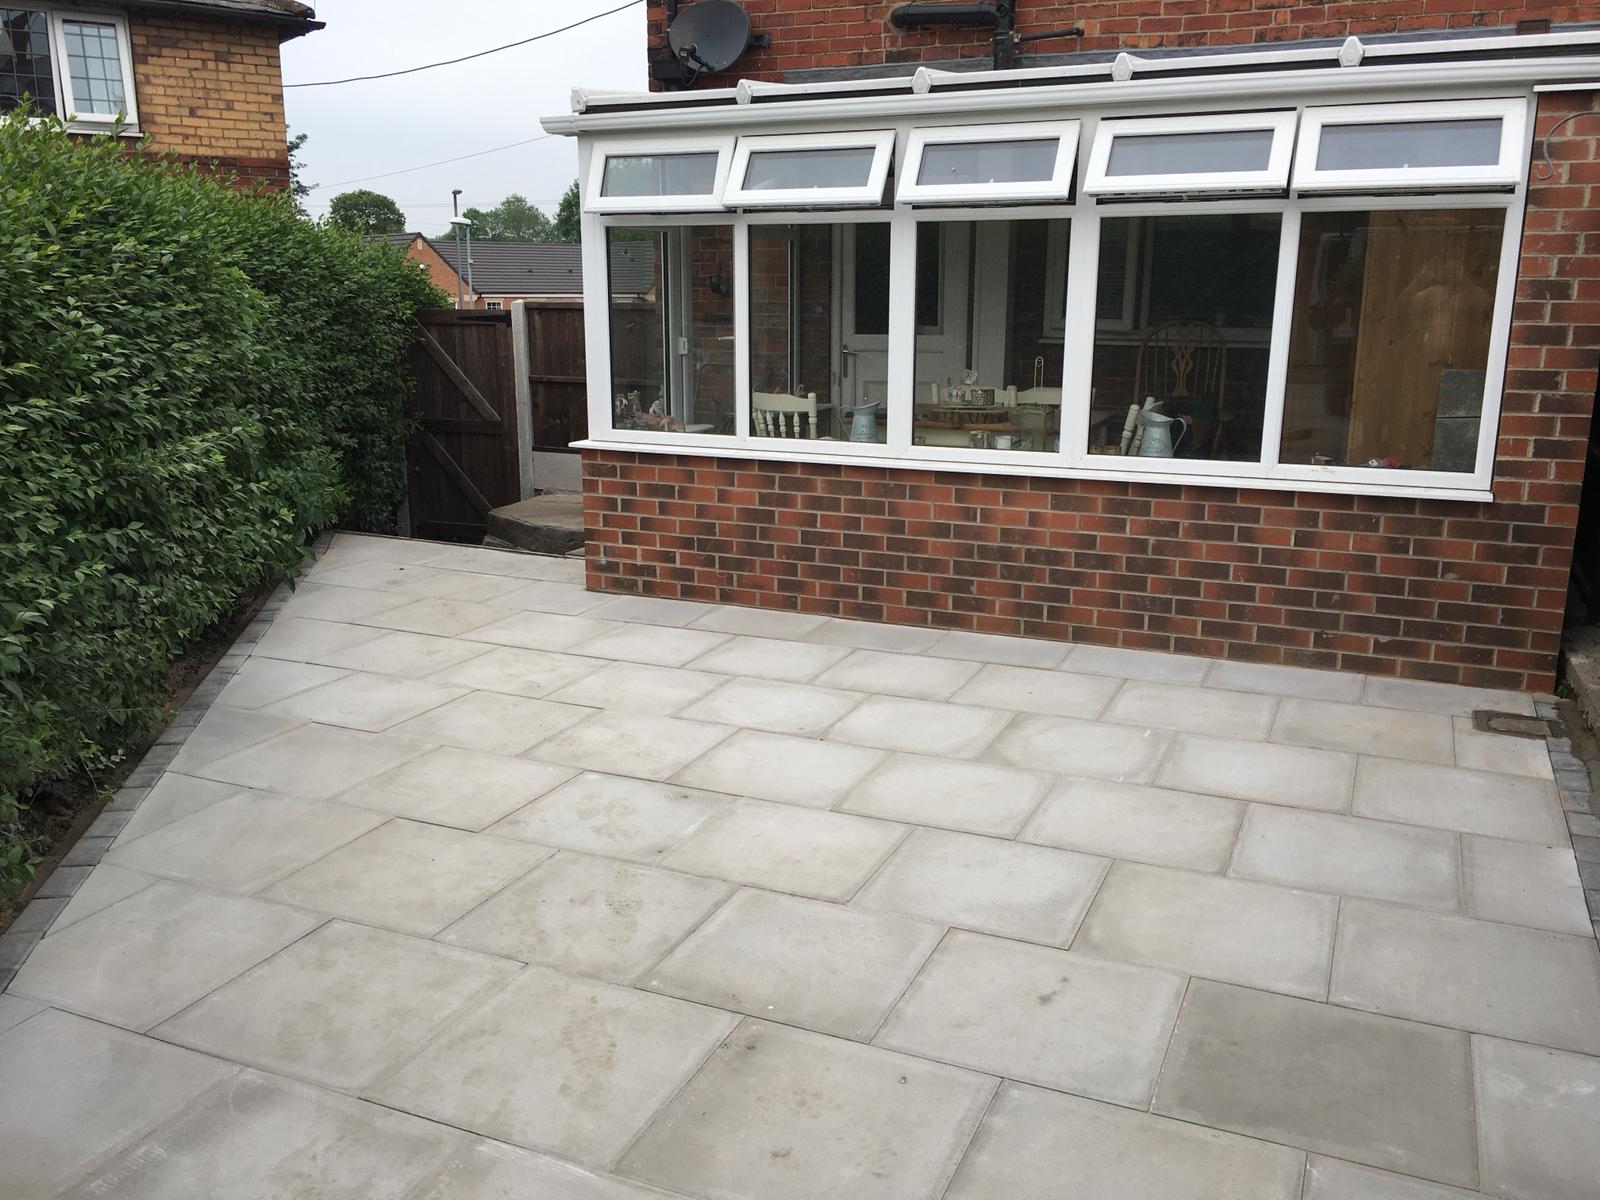 Completed patio project